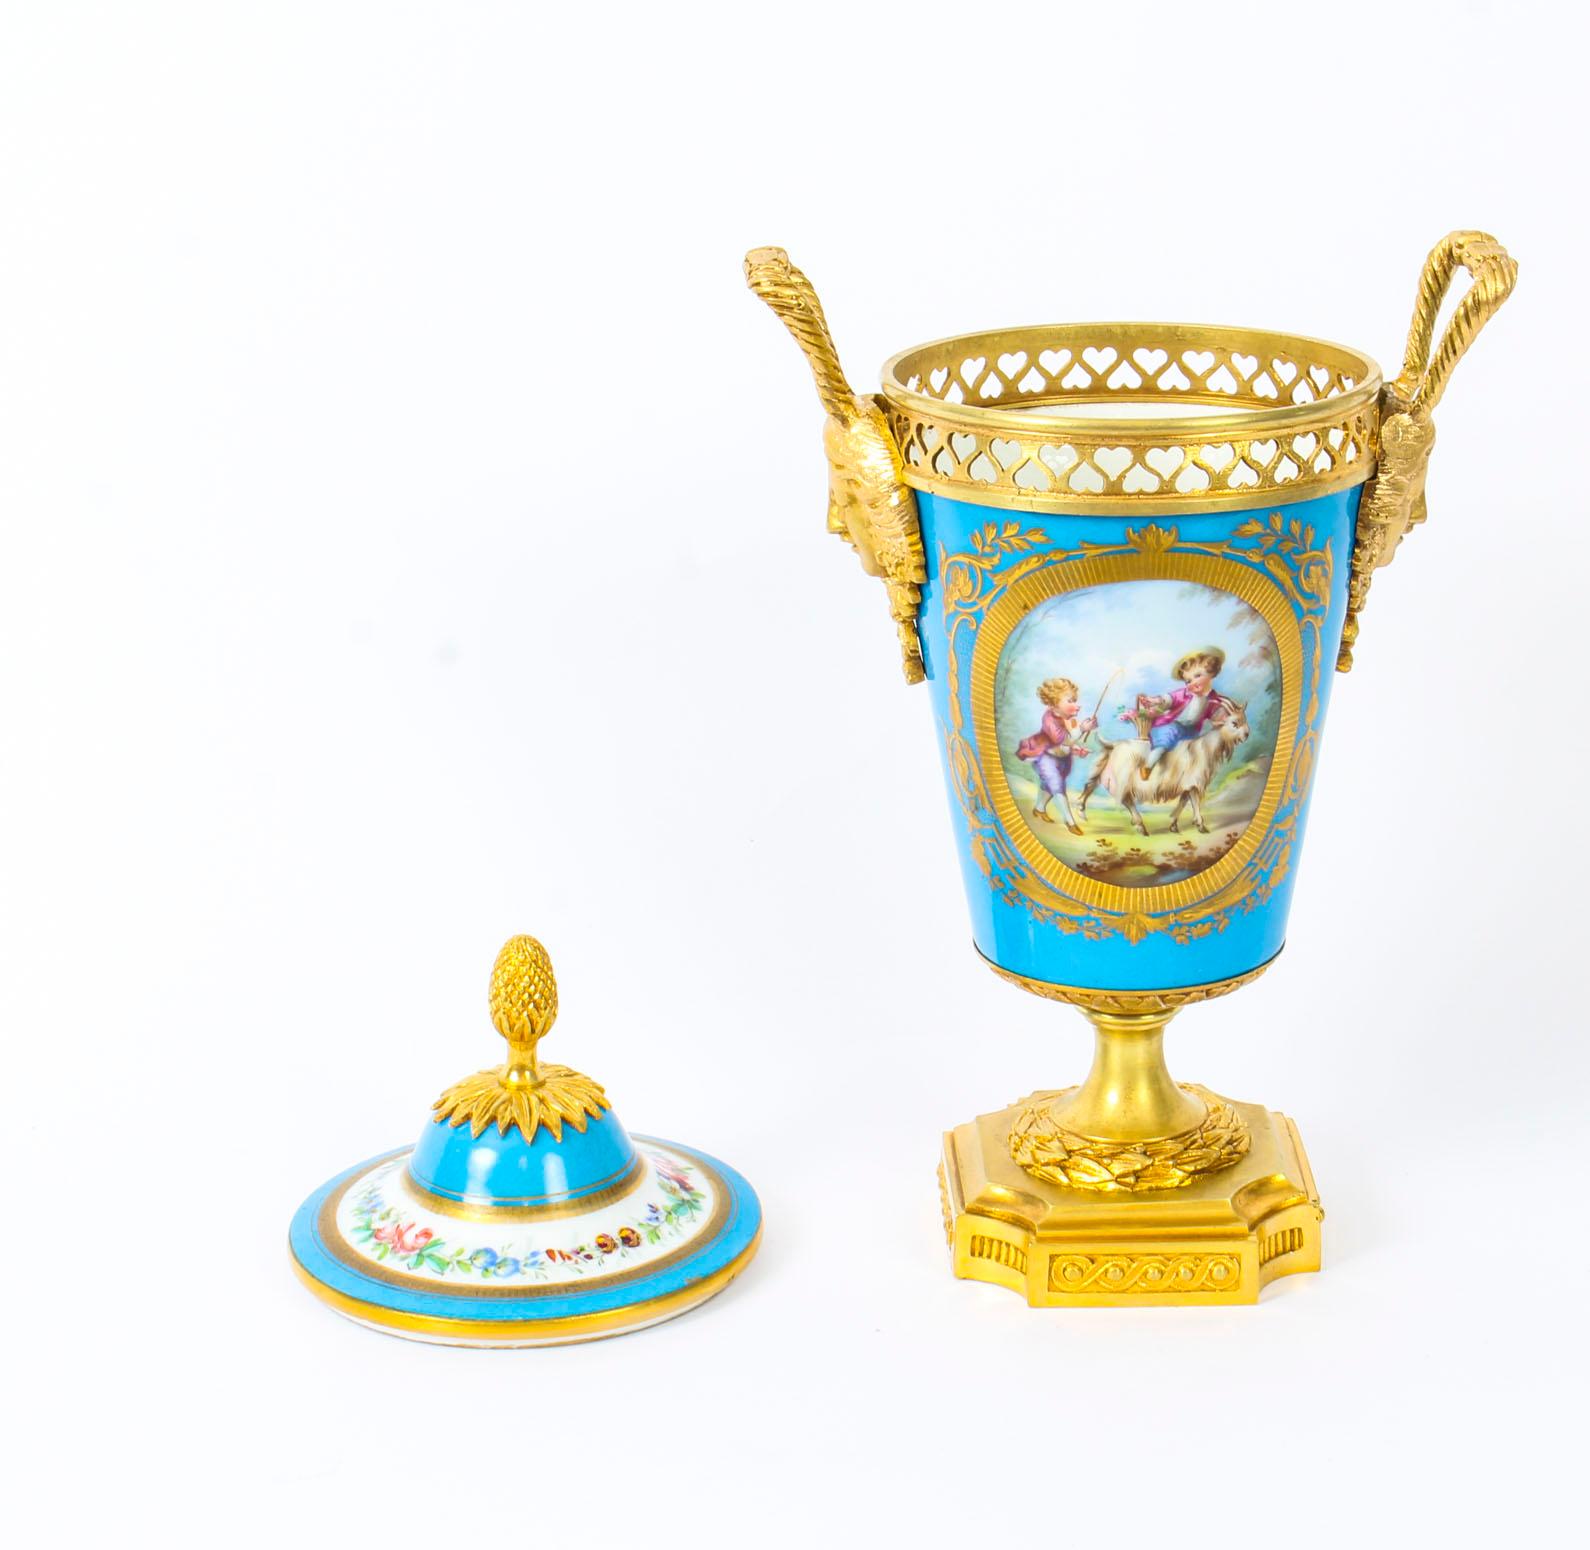 This is a beautiful antique French Sevres porcelain and ormolu-mounted garniture vase and cover, in Louis XV style, circa 1880 in date.

Superbly decorated in Sevres Bleu Celeste with ovals of a hand painted floral bouquet and children playing